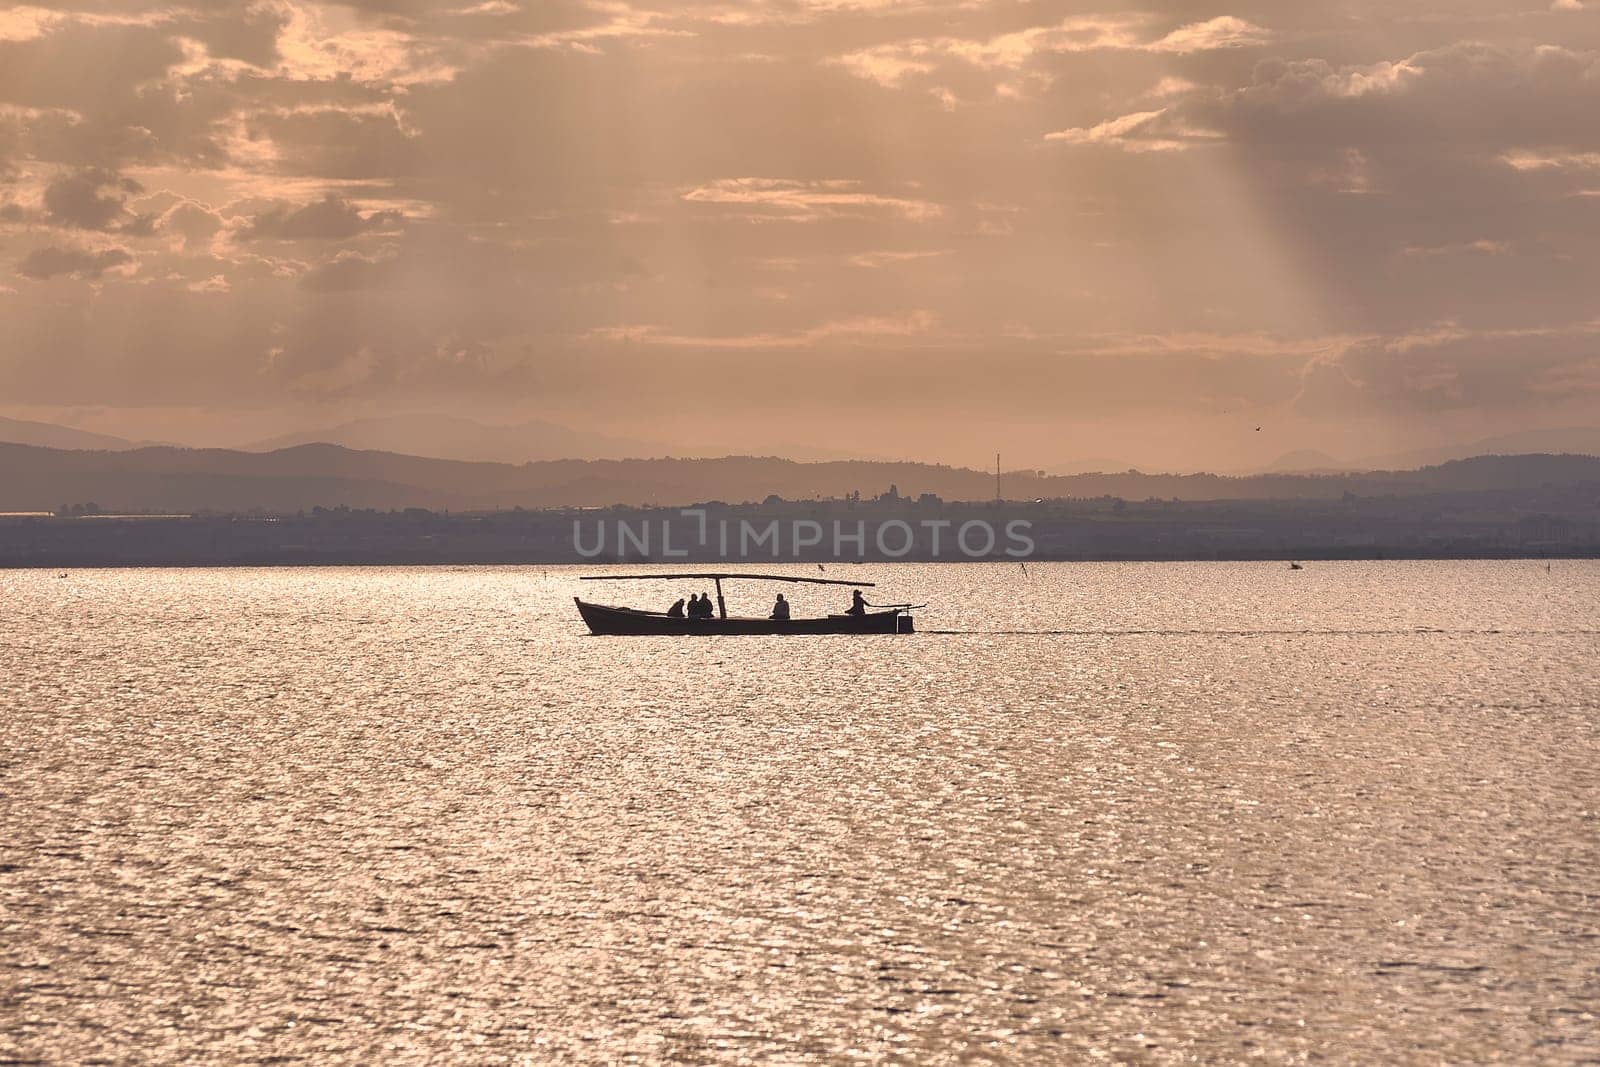 Silhouette of a boat full of people in the Albufera of Valencia. Sunset, sun, calm waters, tradition of reeds.